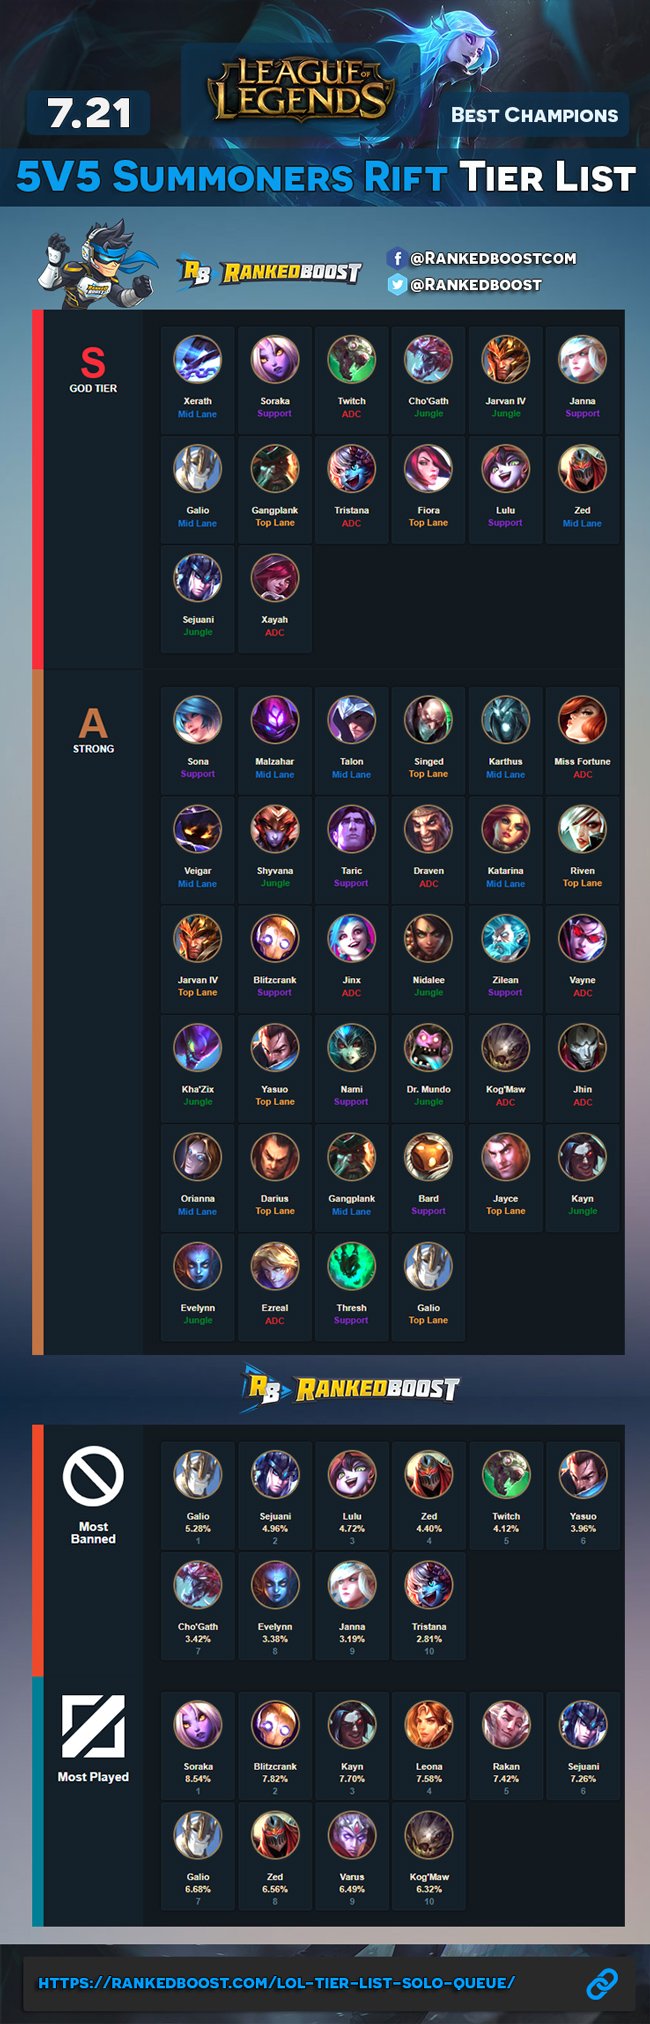 RankedBoost on Twitter: Best Champions Tier List 7.21 | TOP 10 Most and Played In https://t.co/1V7C4moMM9 #LeagueOfLegends https://t.co/QcRJ03fkpk" / Twitter